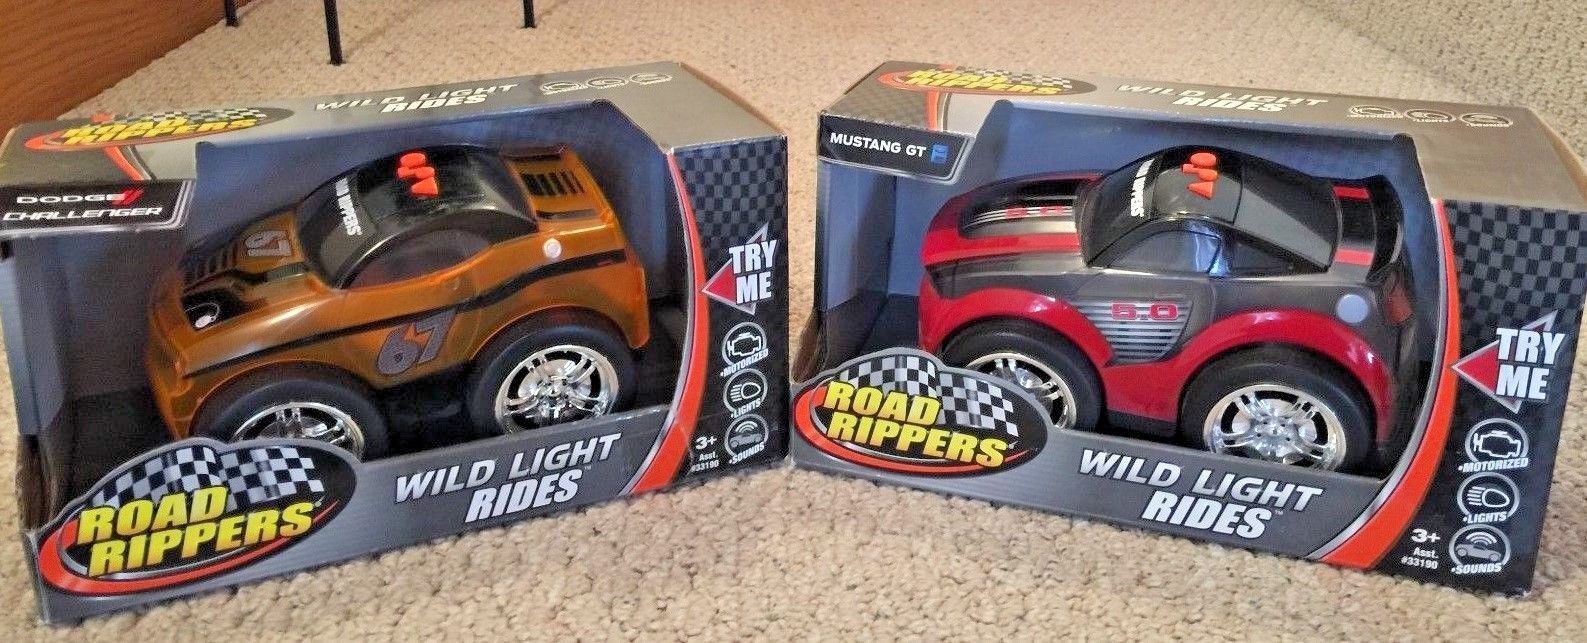 Road Rippers Wild Light Rides Lot of 2 NEW Dodge Challenger/Mustang GT SHIP FREE